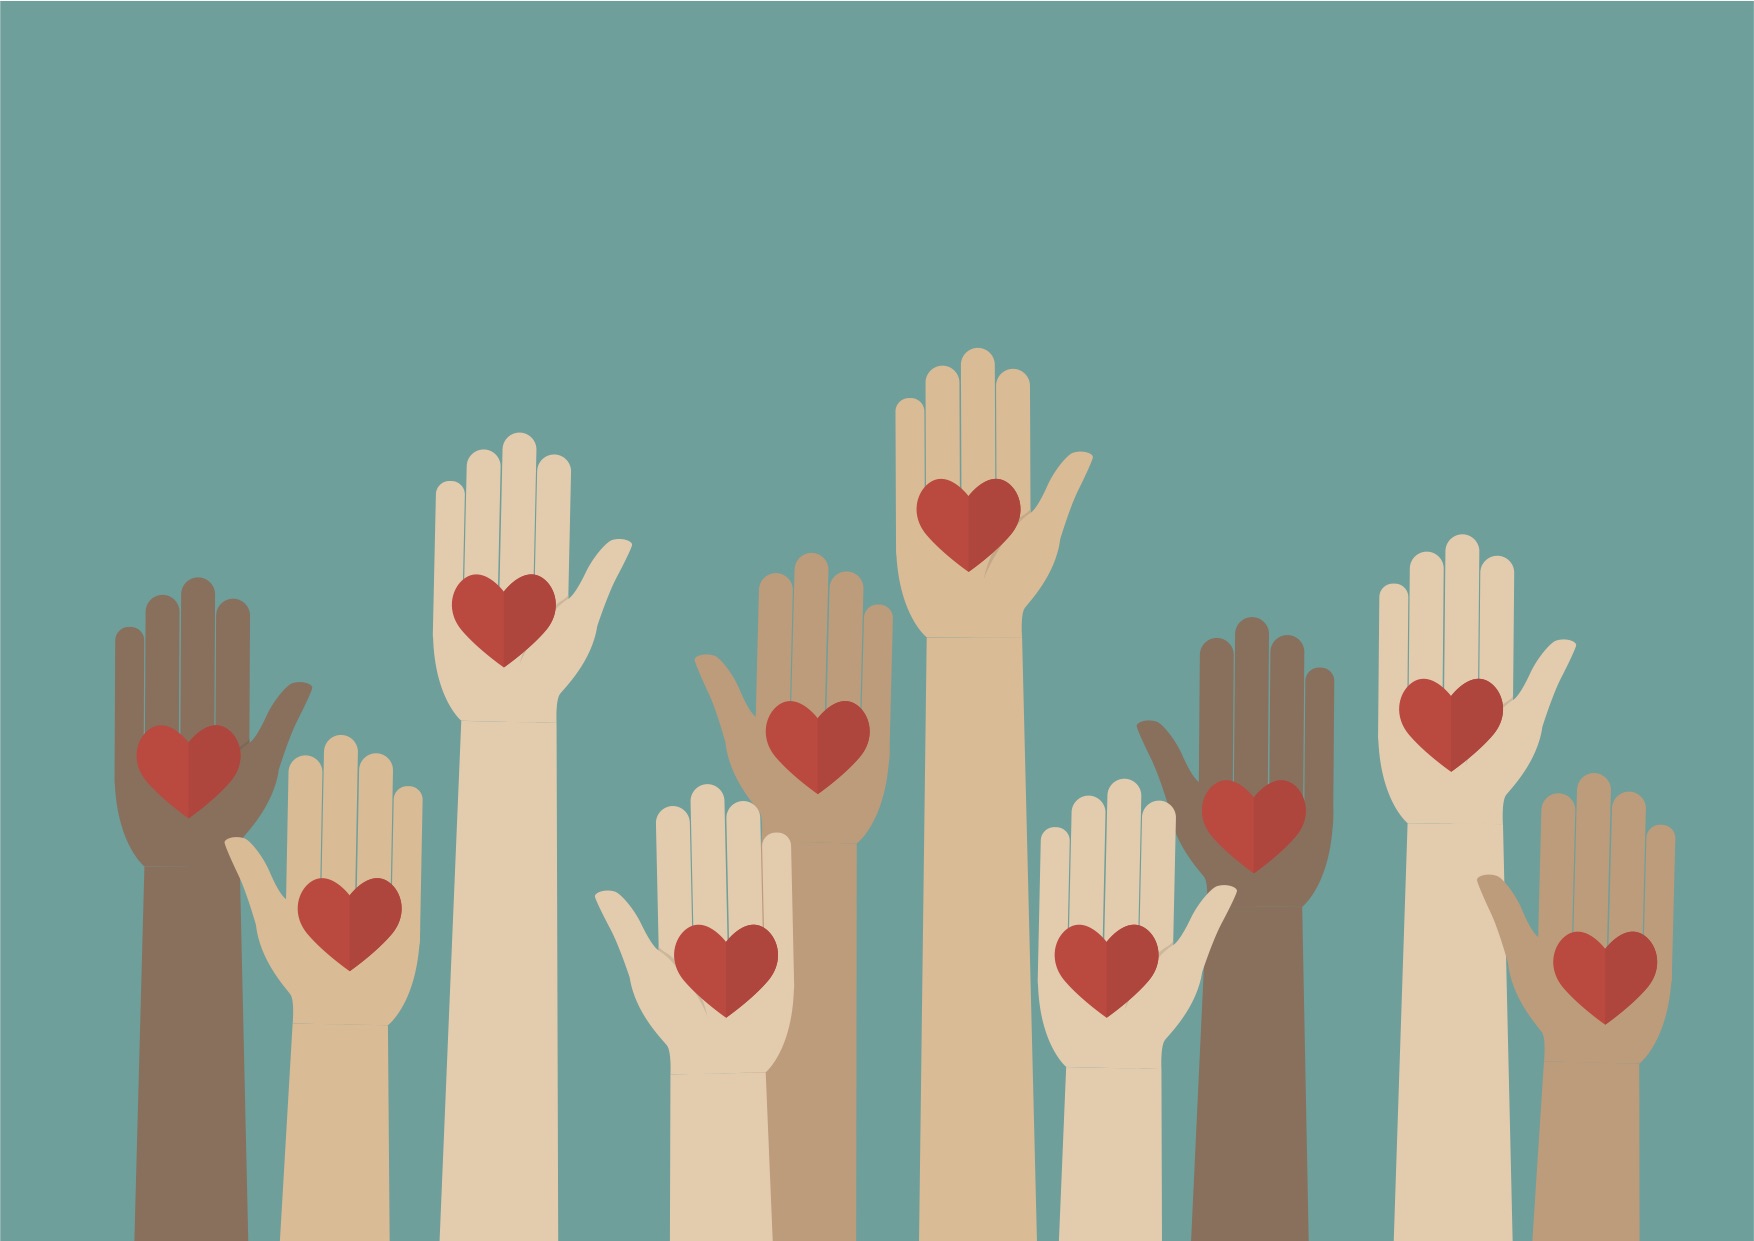 Hands raised against a teal background with hearts in their centers.